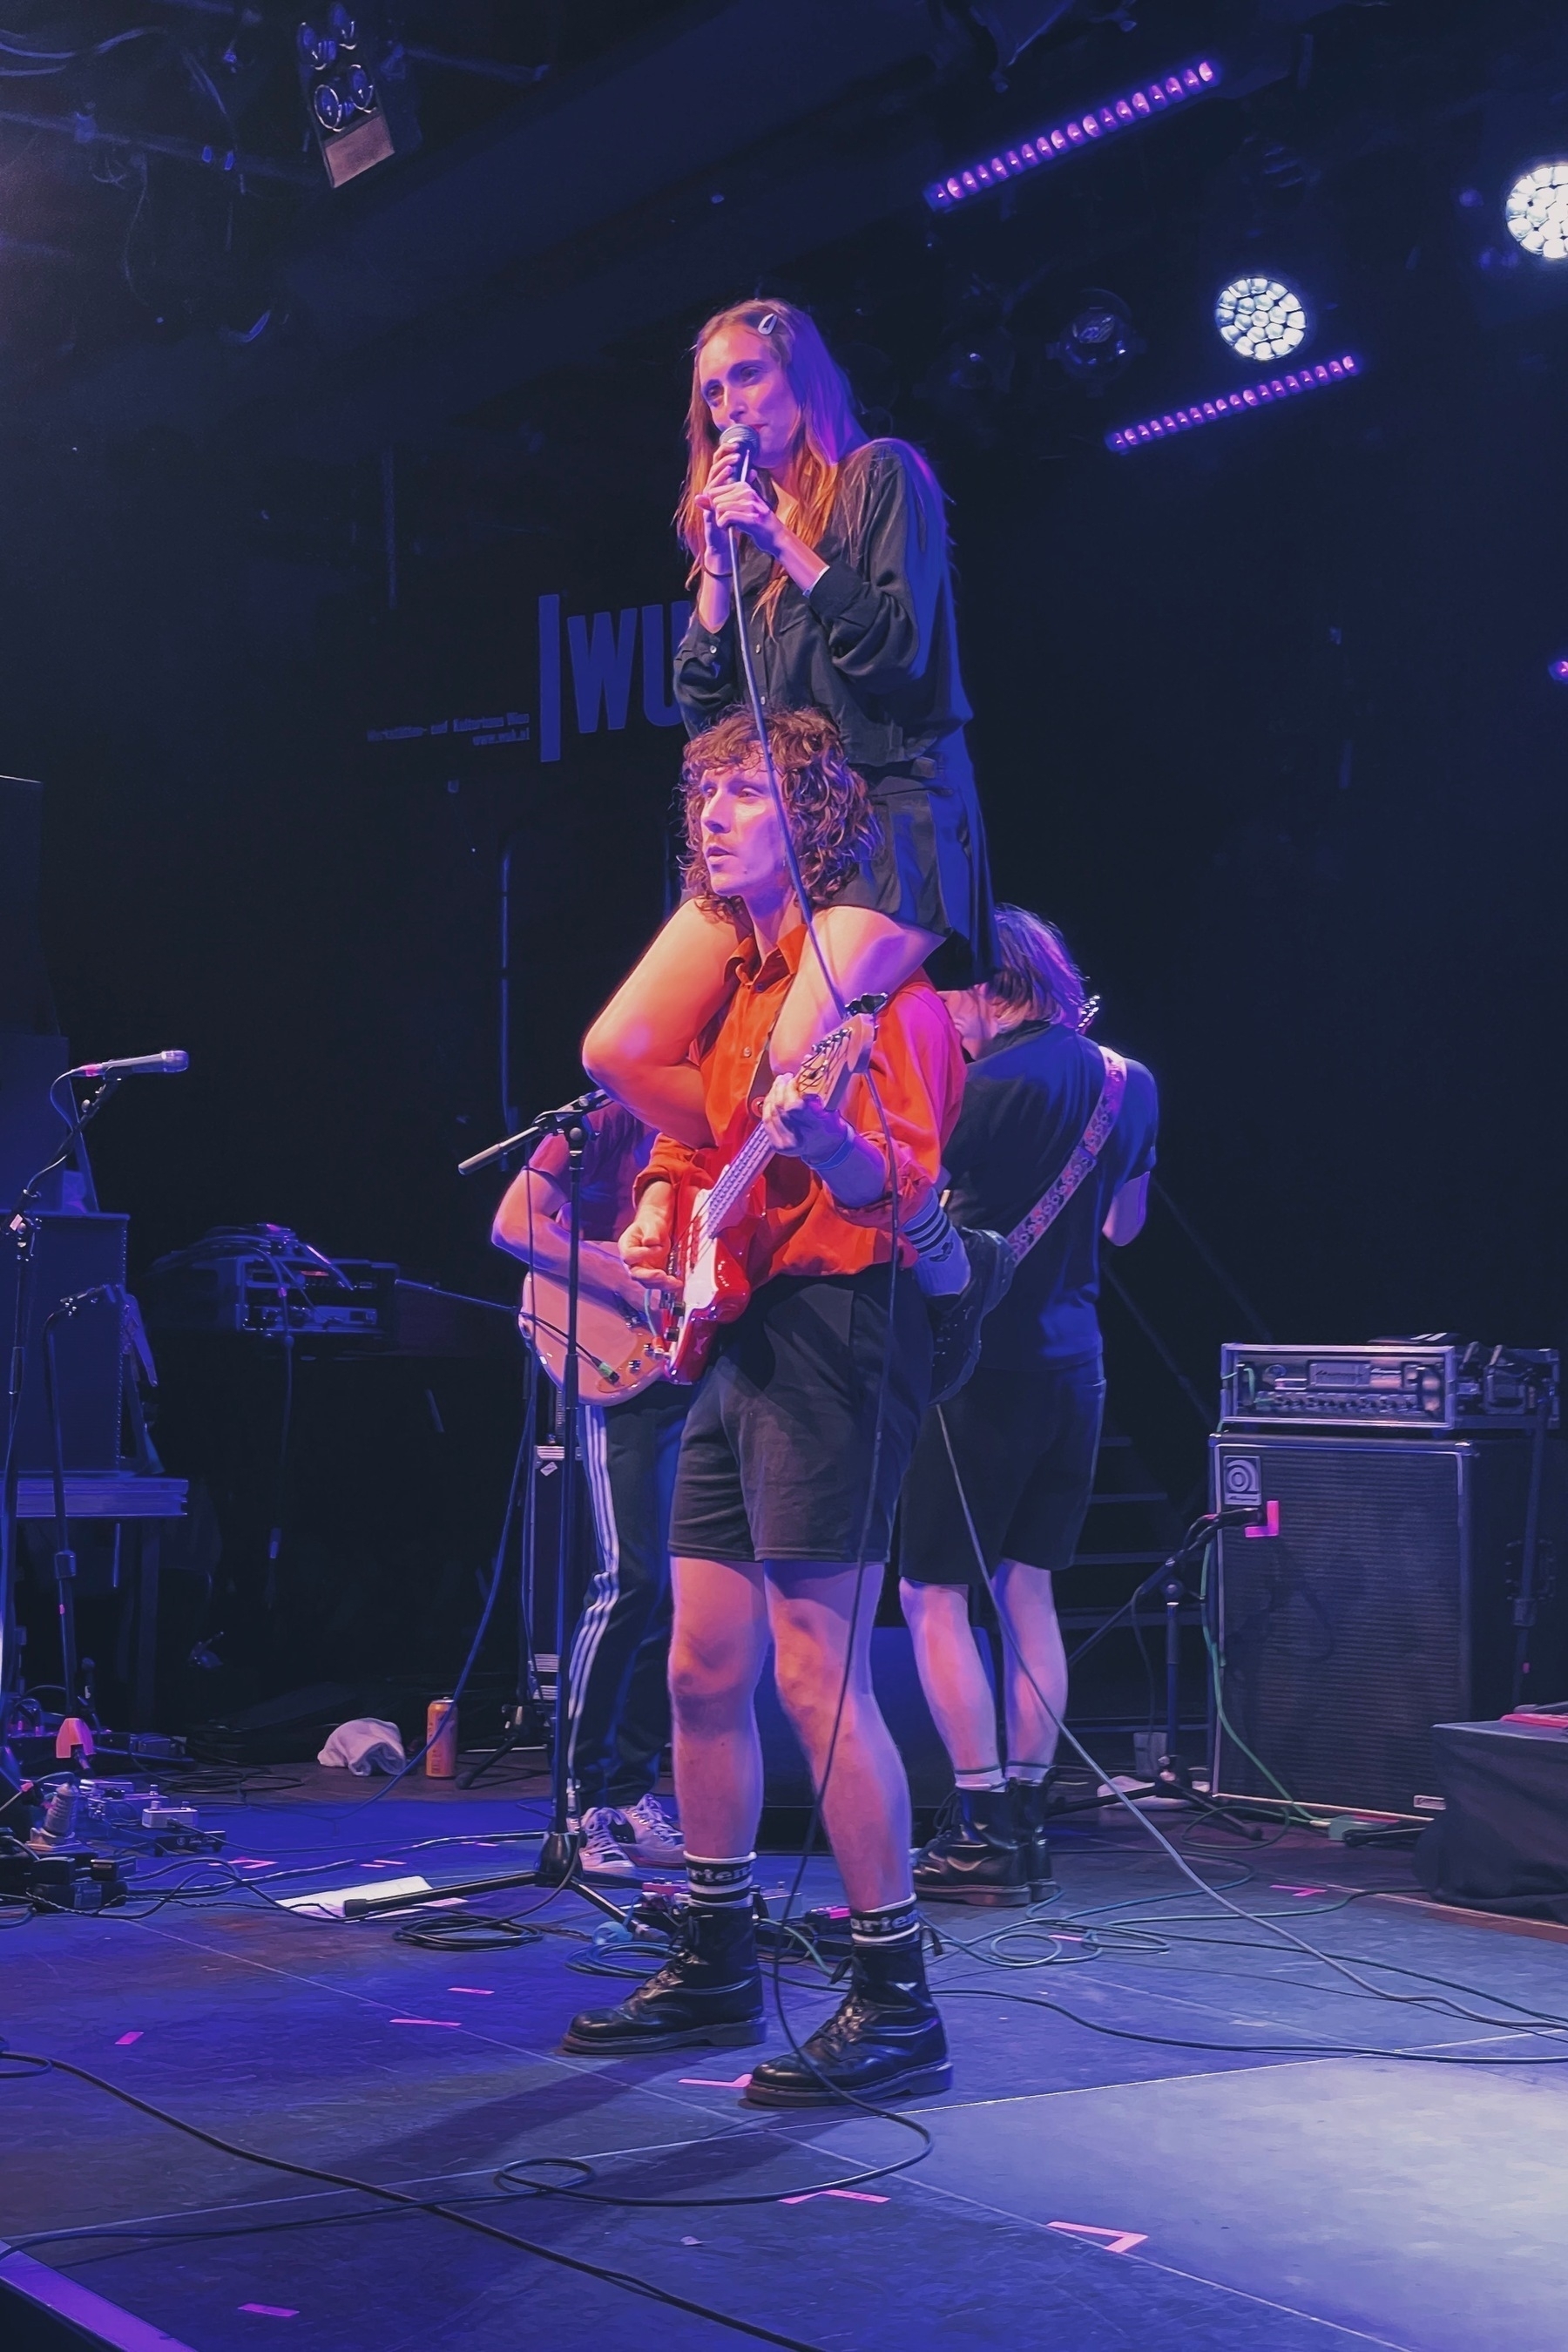 Singer sitting on the shoulders of the bassist